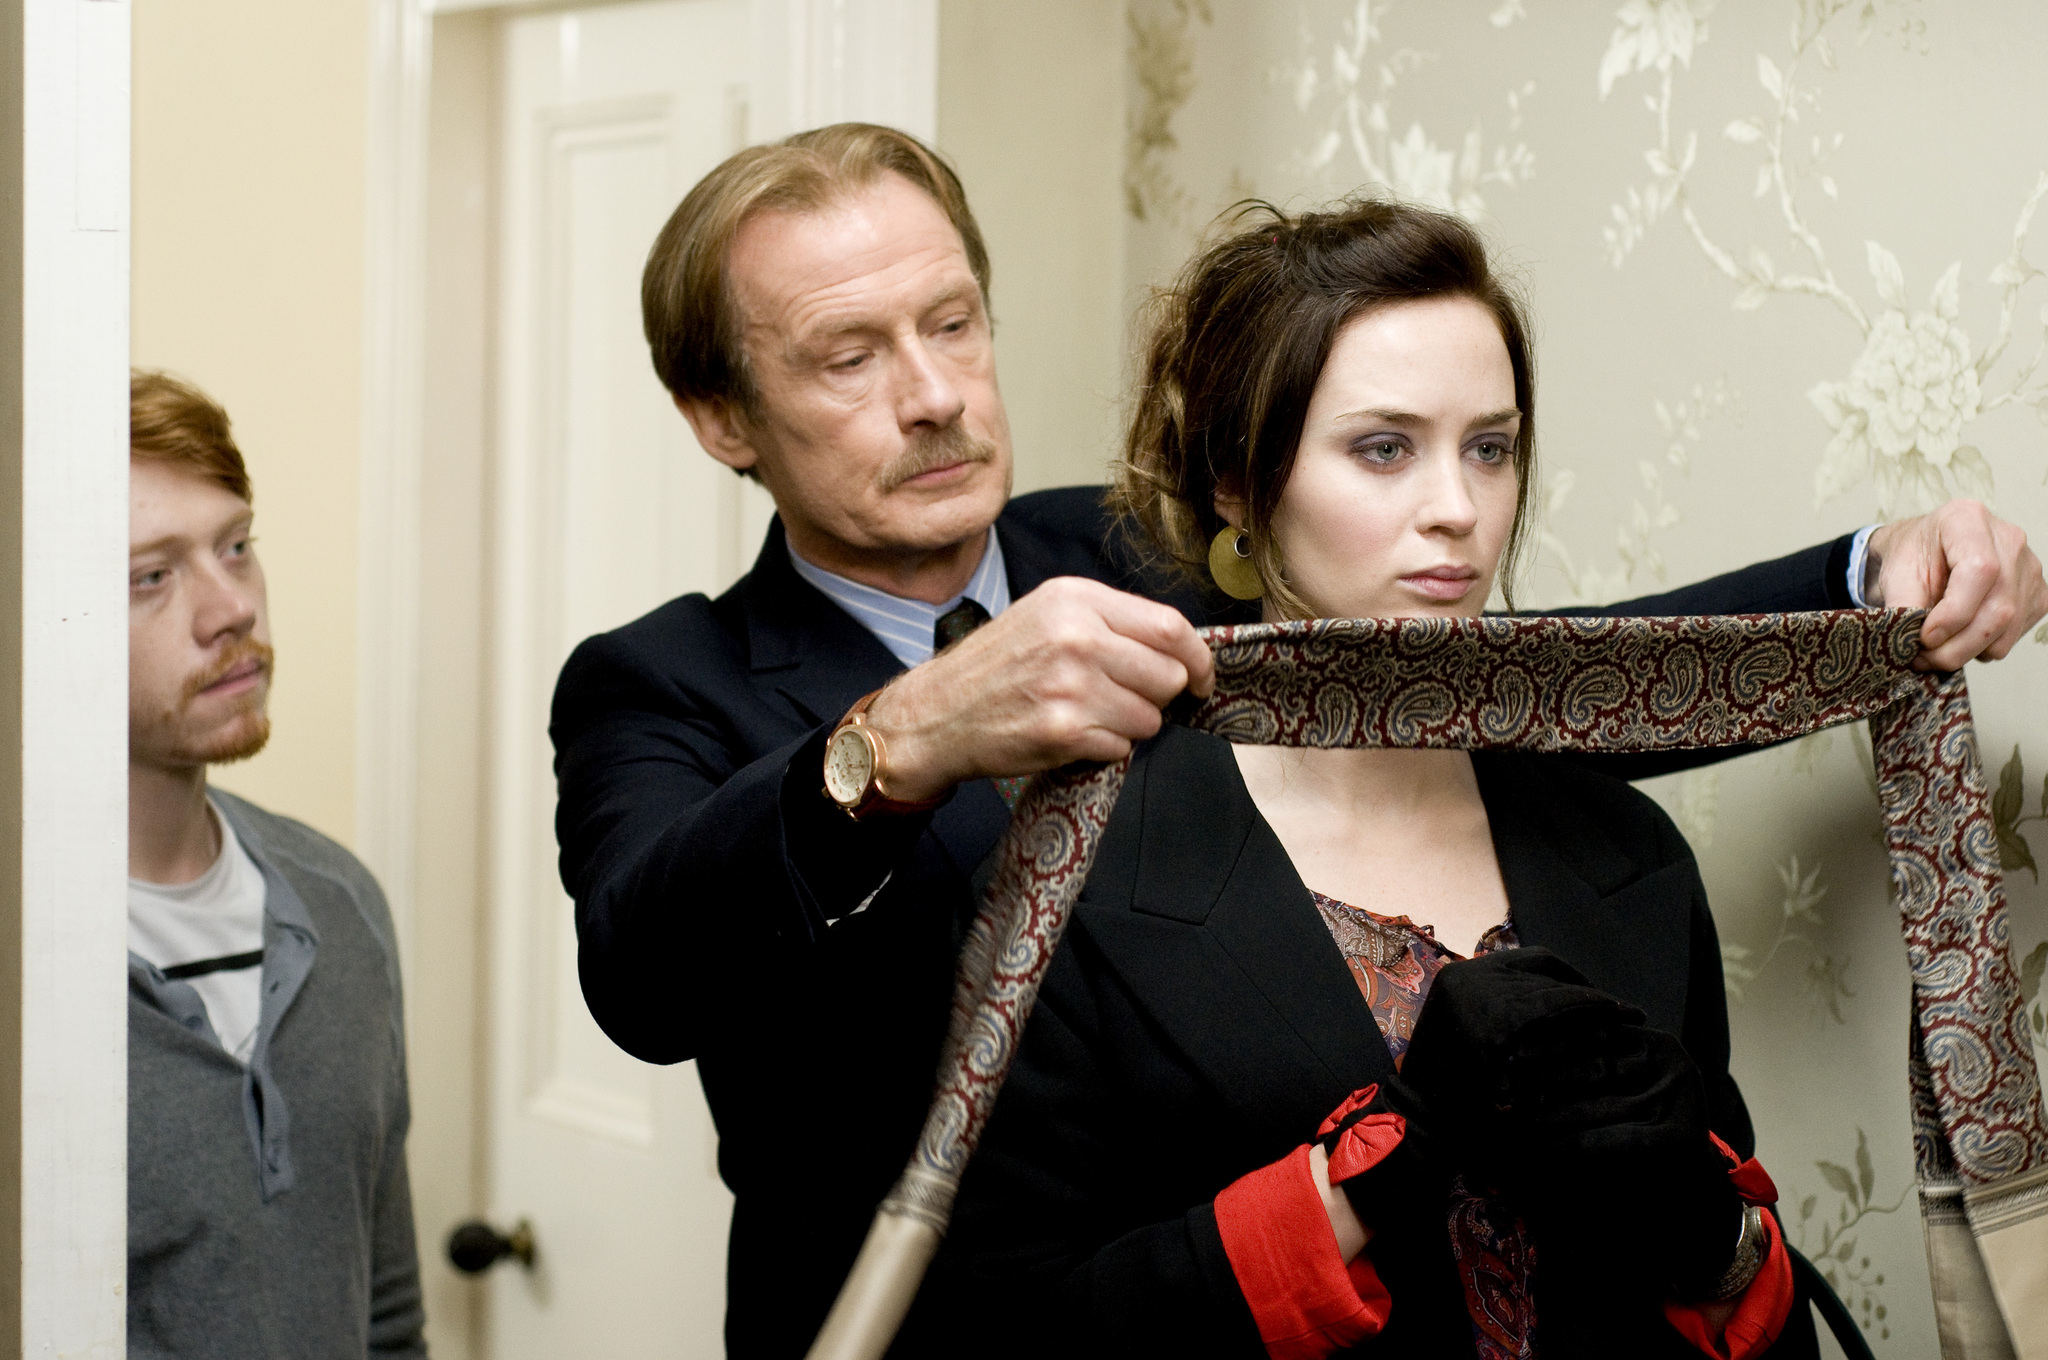 Still of Rupert Grint, Bill Nighy and Emily Blunt in Wild Target (2010)